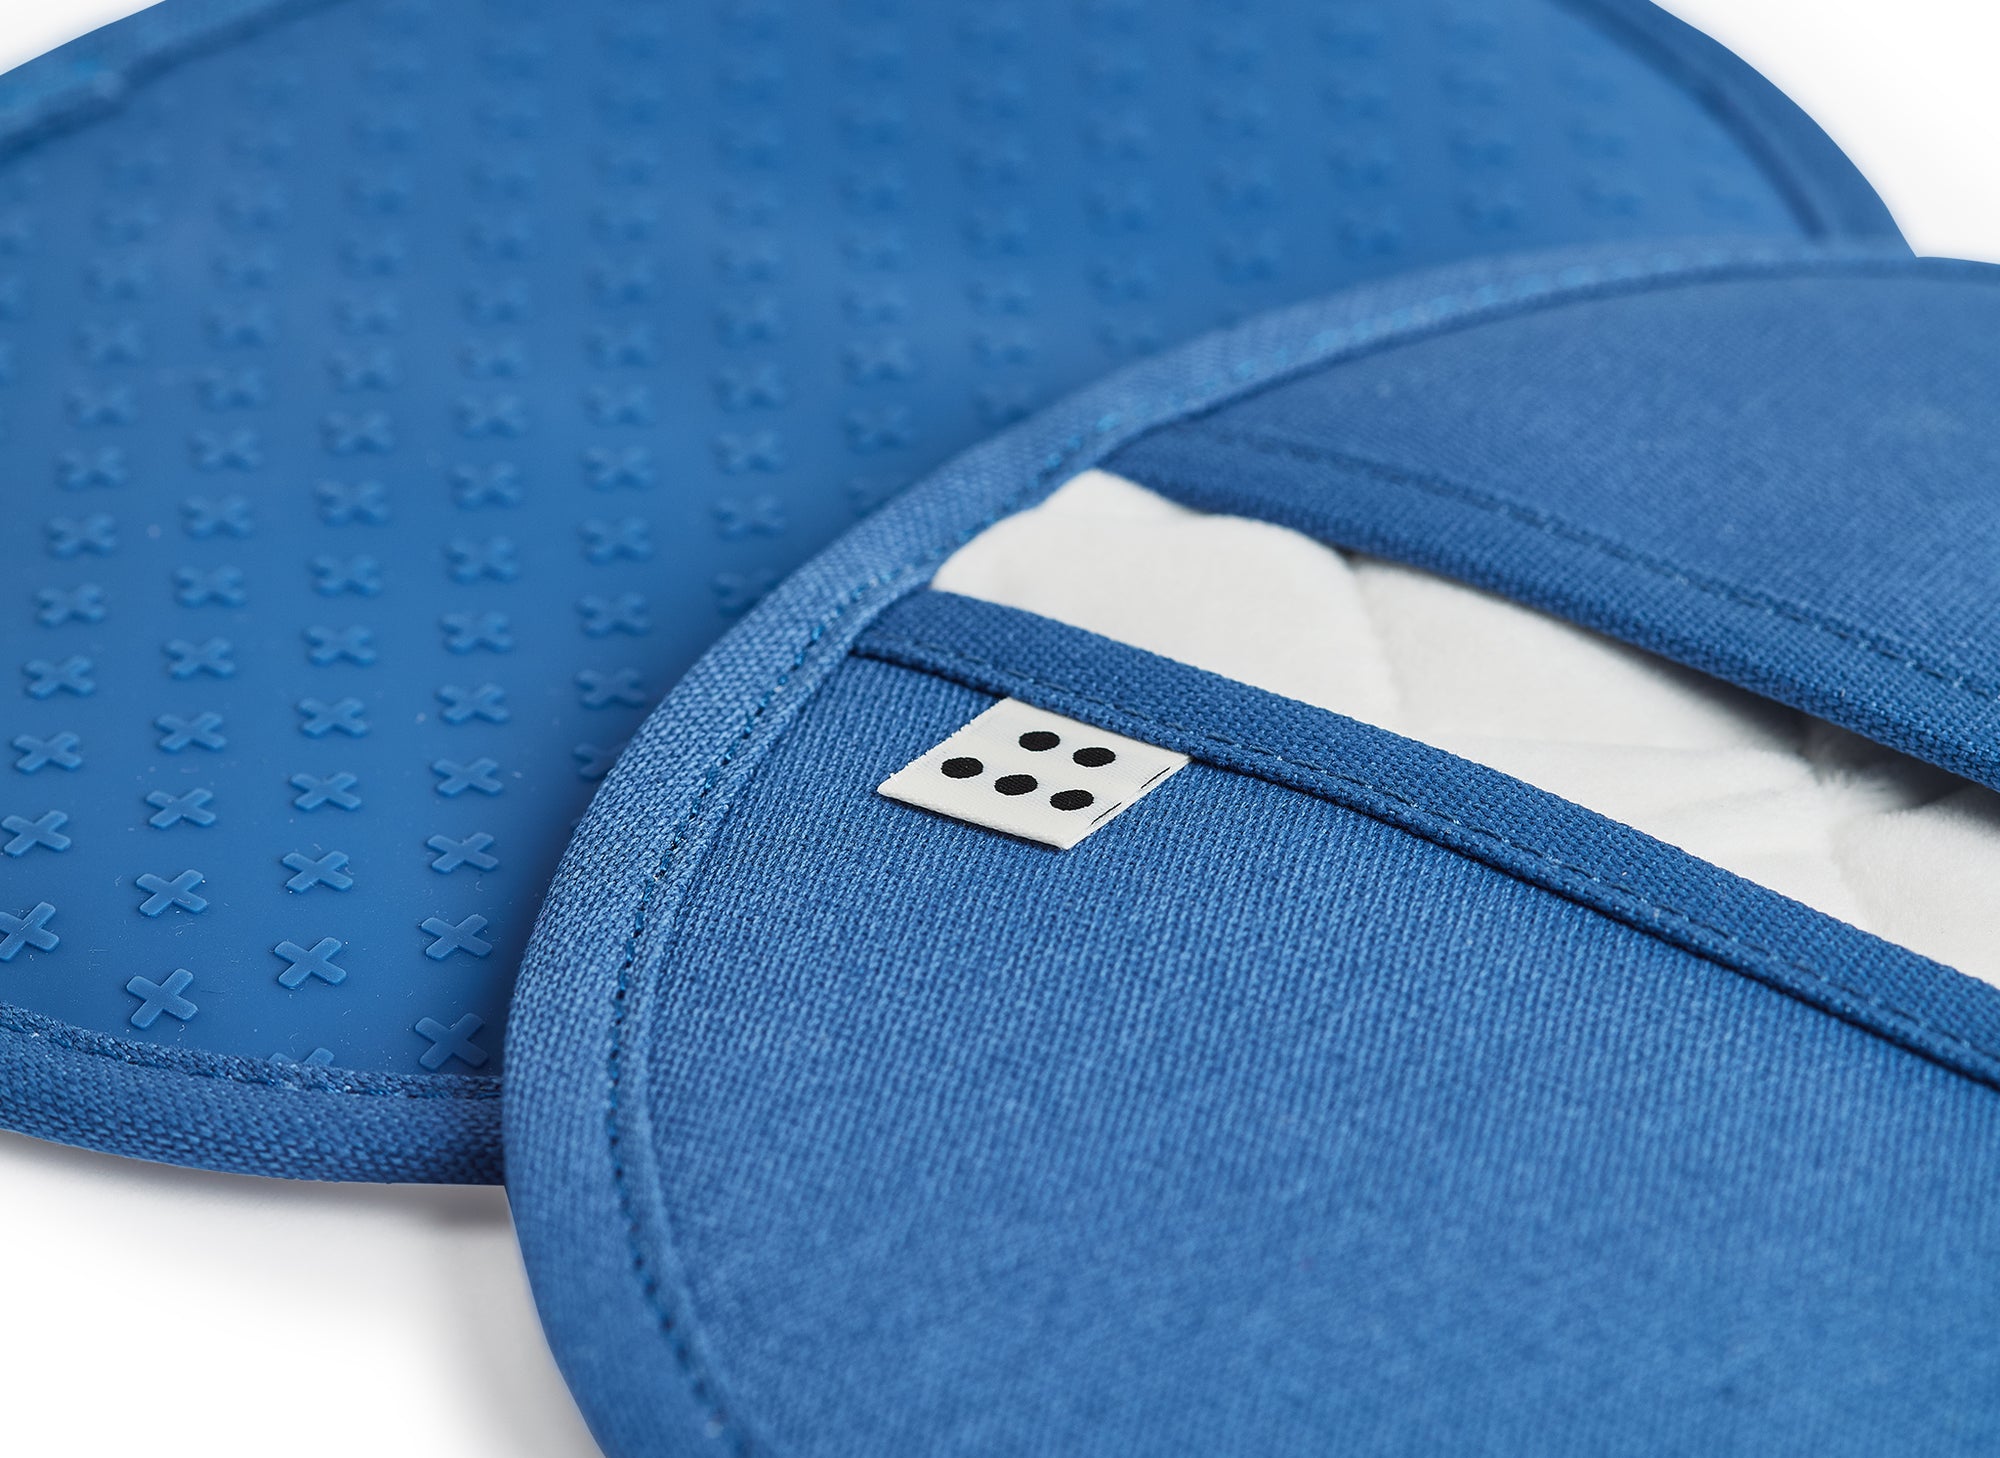 A close up shot of two Misen Pot Holders in blue. The gripped side of one pot holder is visible, as is the opening of the other pot holder, with the Misen logo on a tag. 